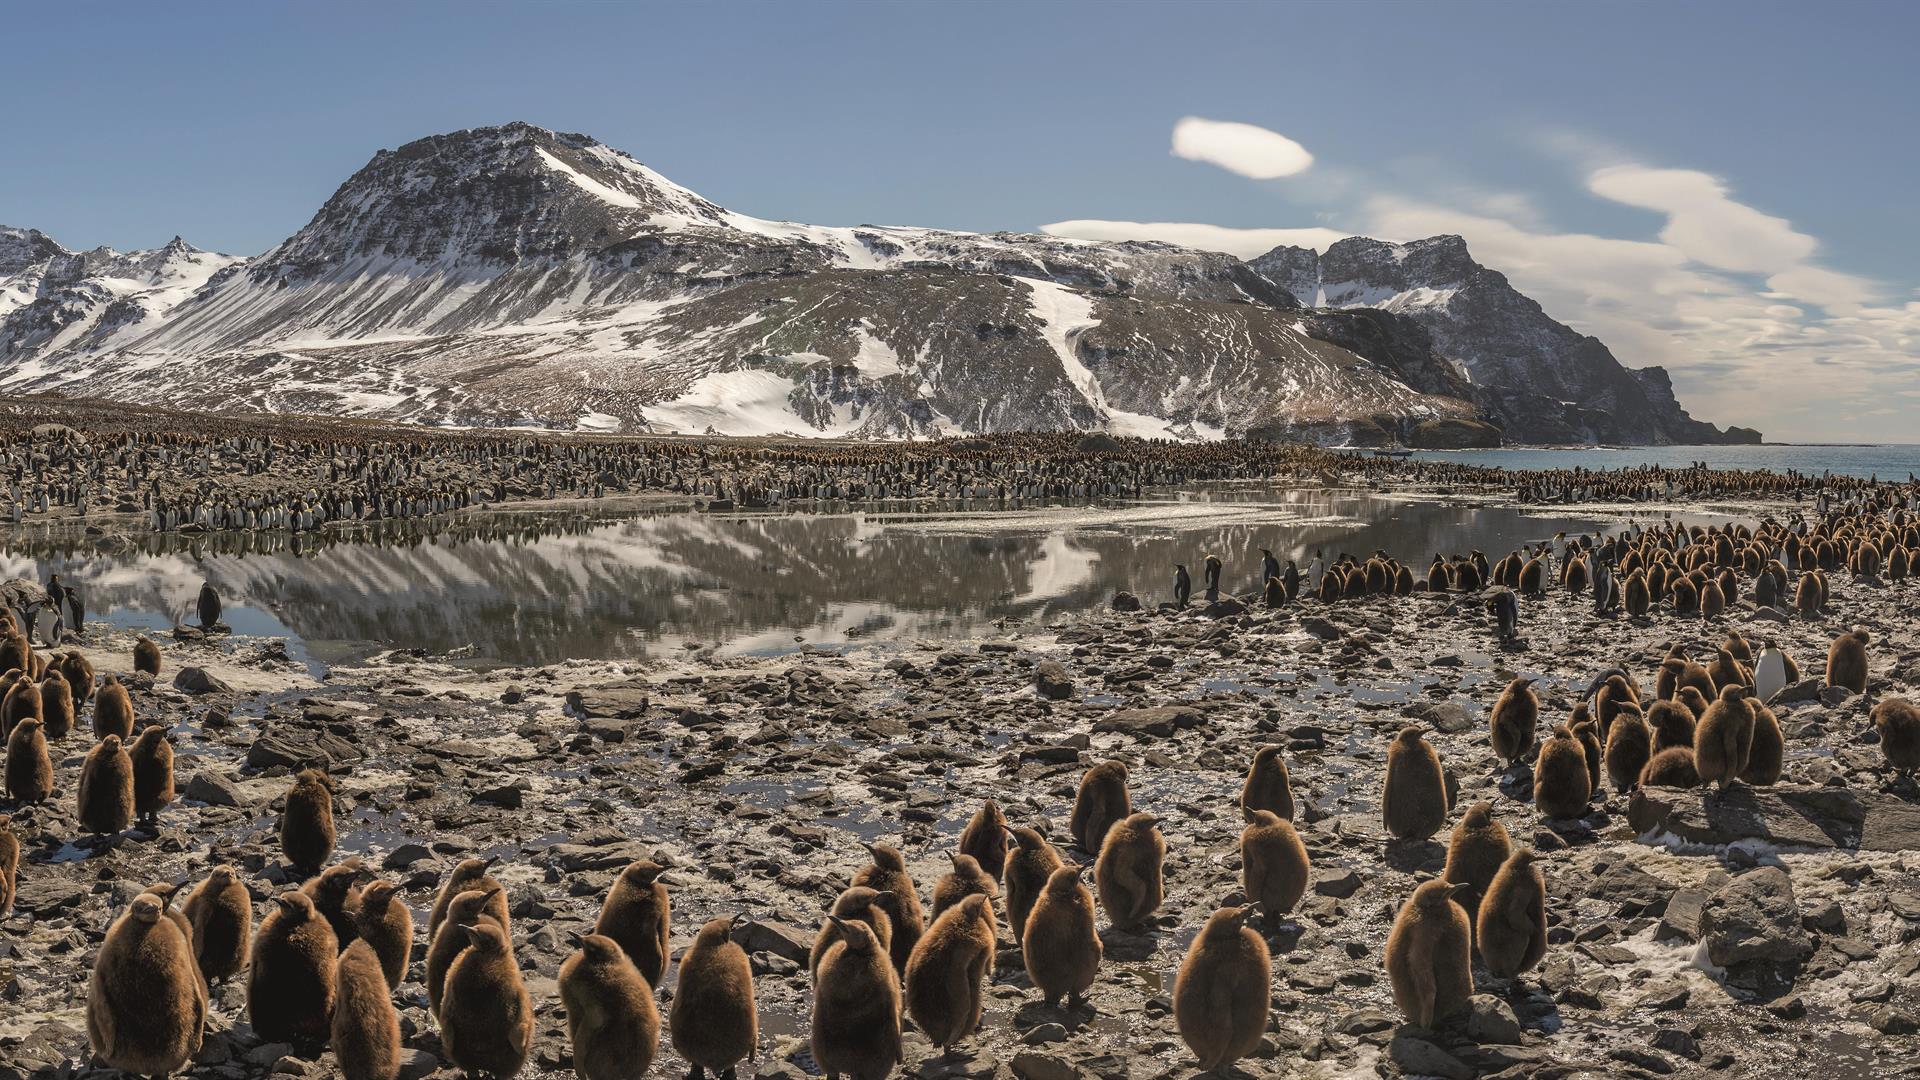 This Beach Contains One Of The Largest Penguin Colonies In The World, And One Of The Densest Aggregations Of Life On The Planet